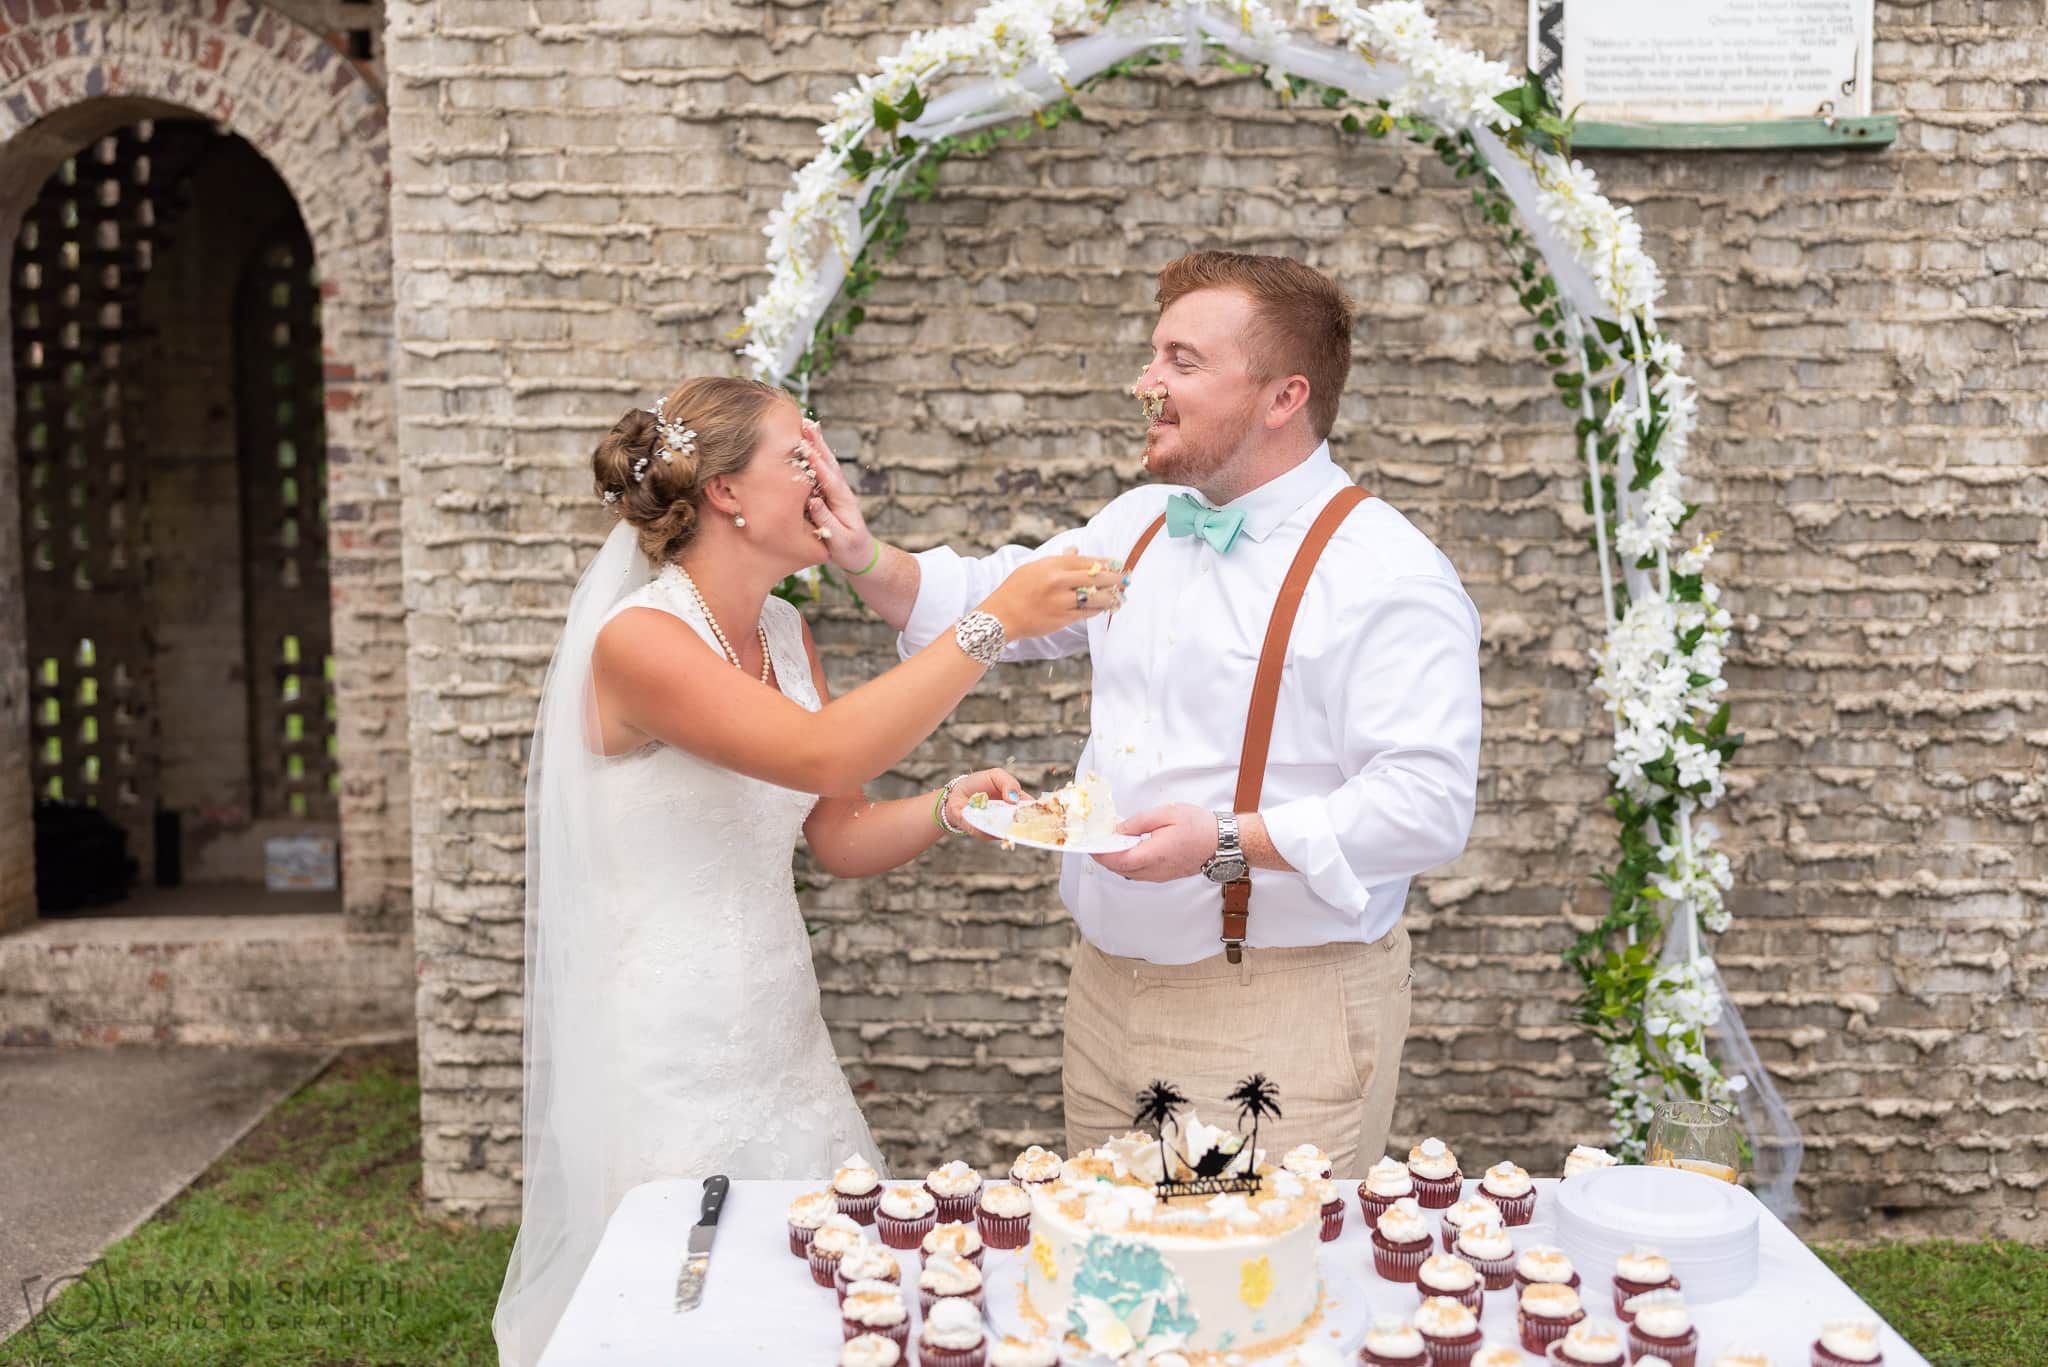 Groom smashing cake in the face of the bride - Atalaya Castle - Huntington Beach State Park